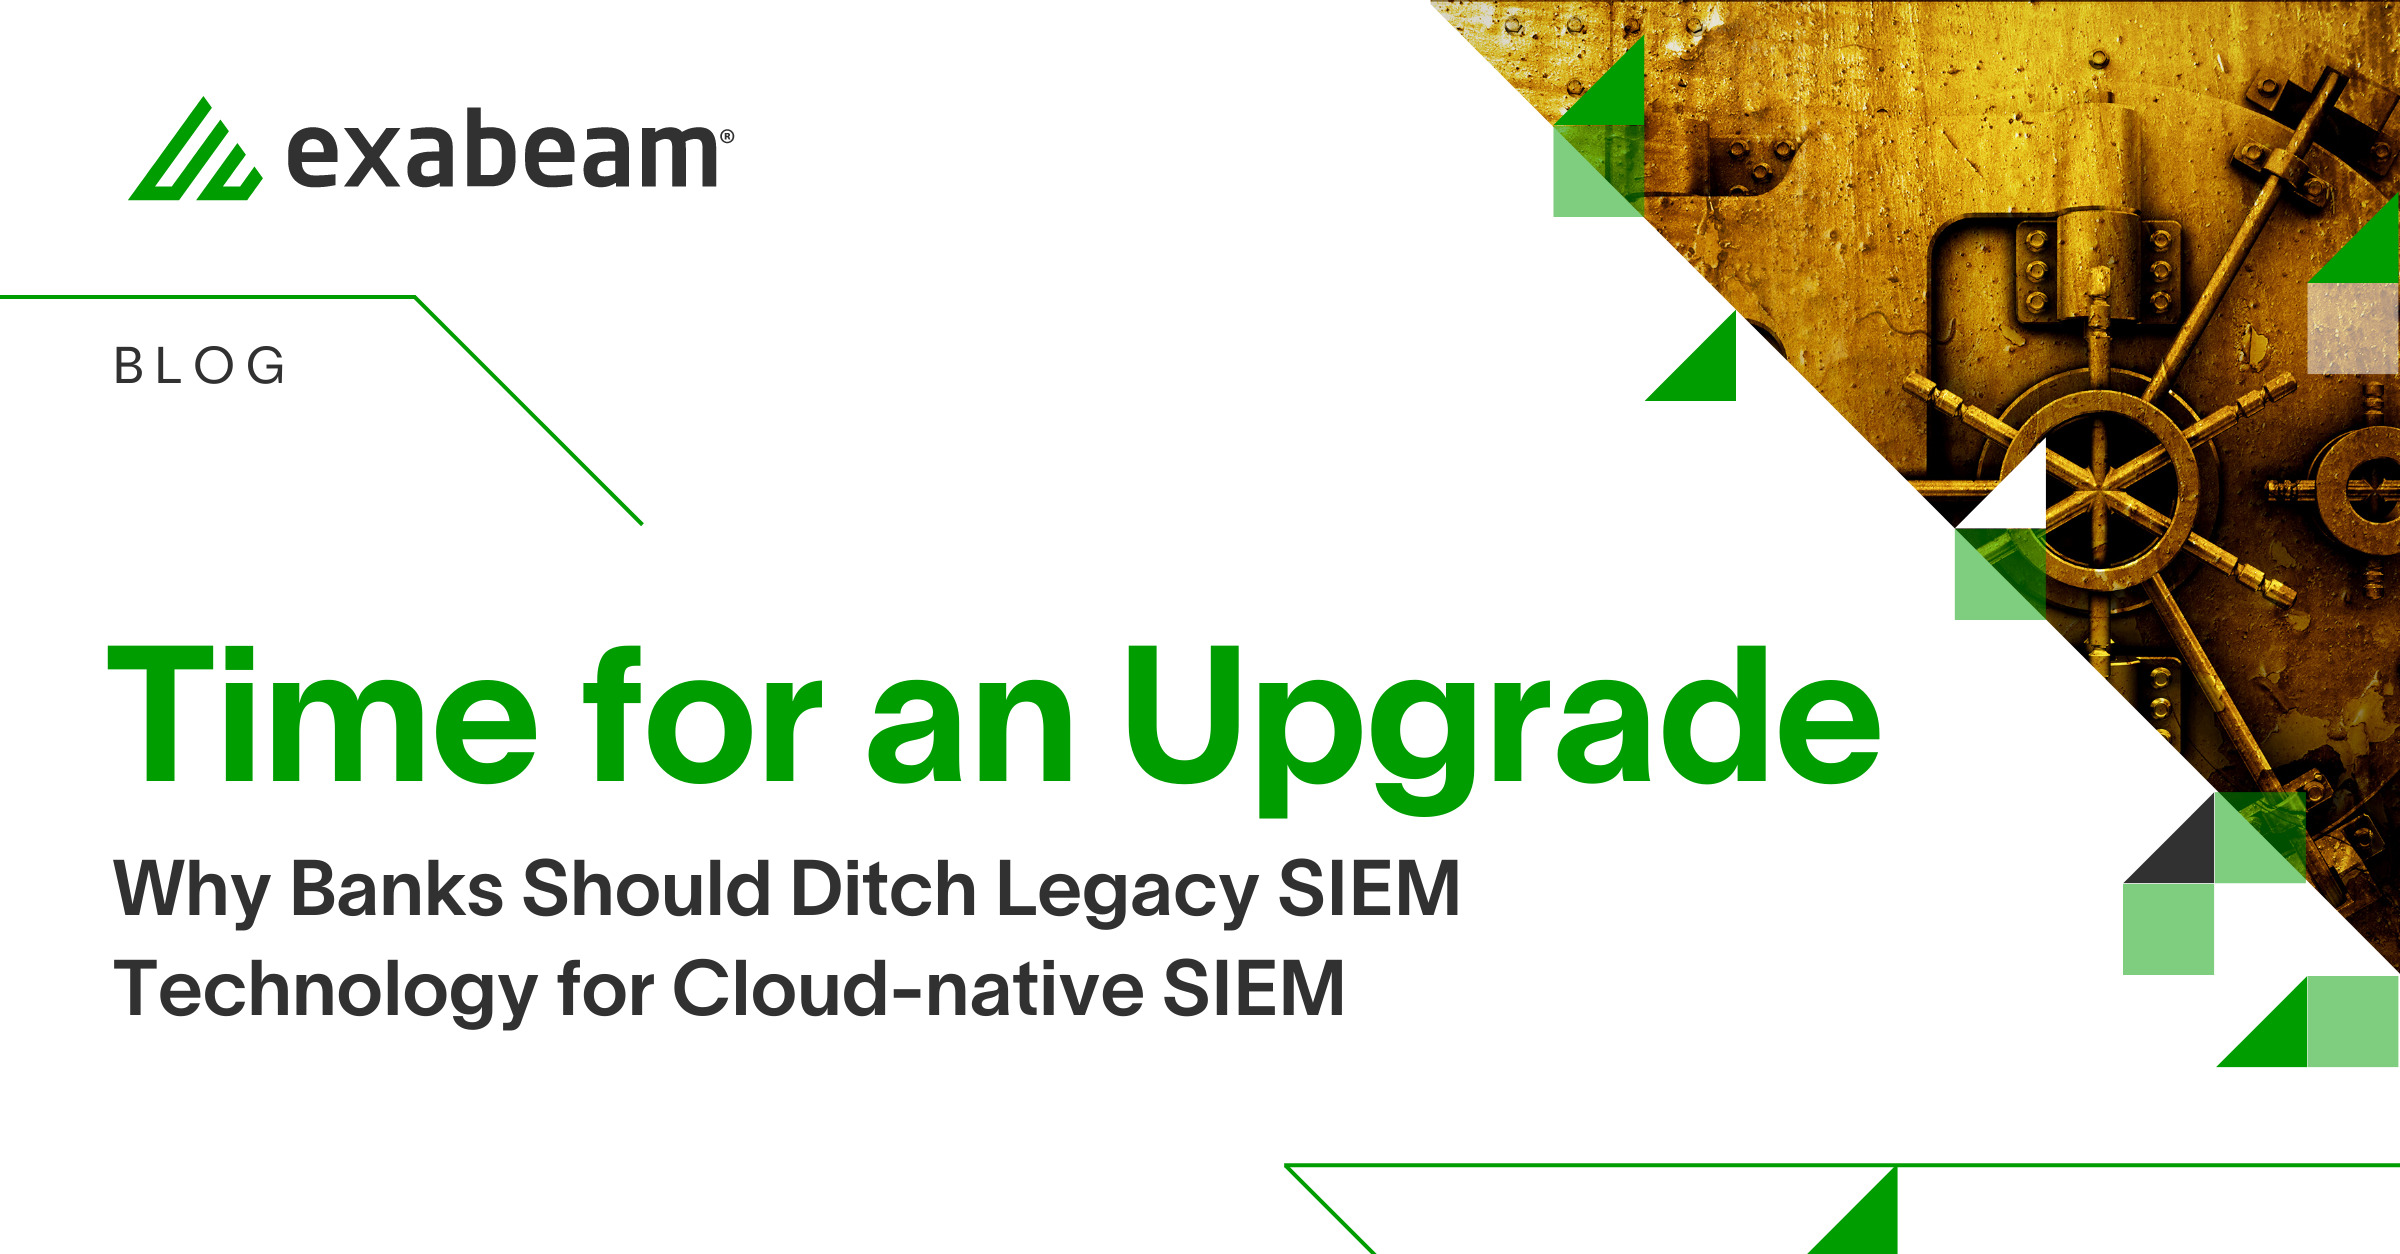 Time for an Upgrade — Why Banks Should Ditch Legacy SIEM Technology for Cloud-native SIEM